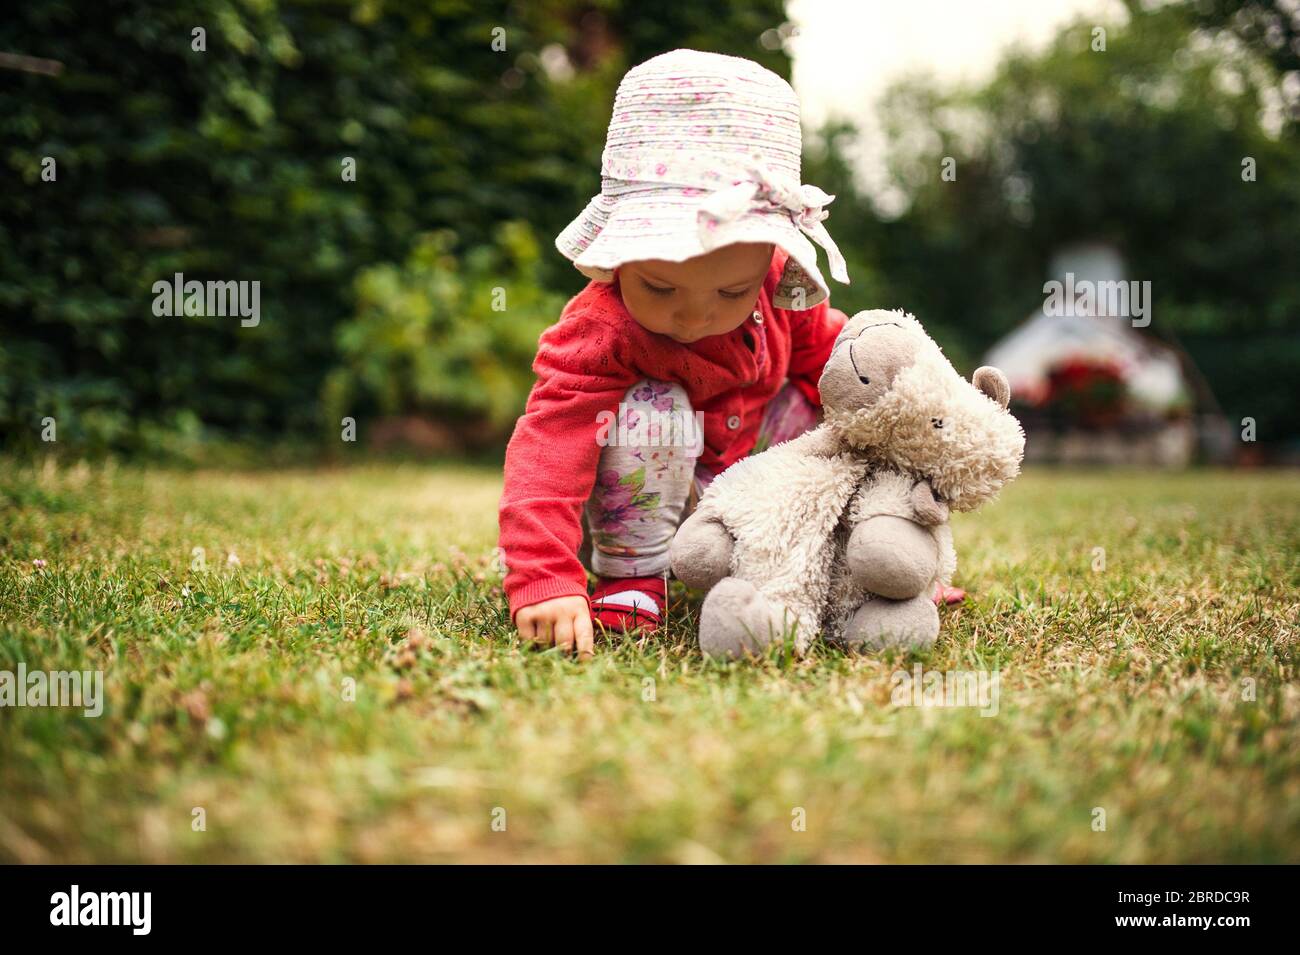 A front view of toddler girl outdoors in garden in summer. Stock Photo